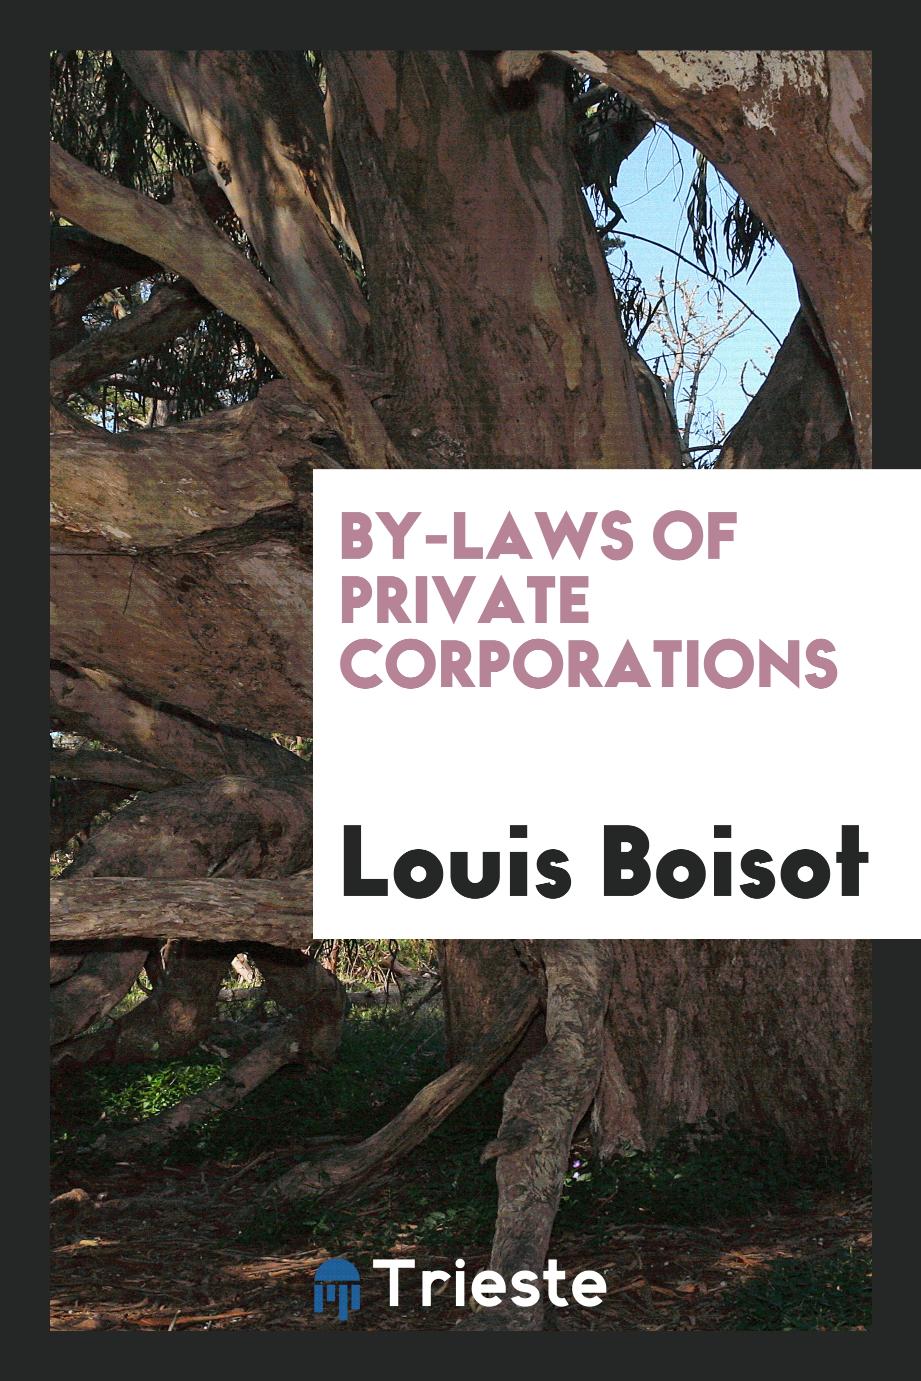 By-laws of private corporations